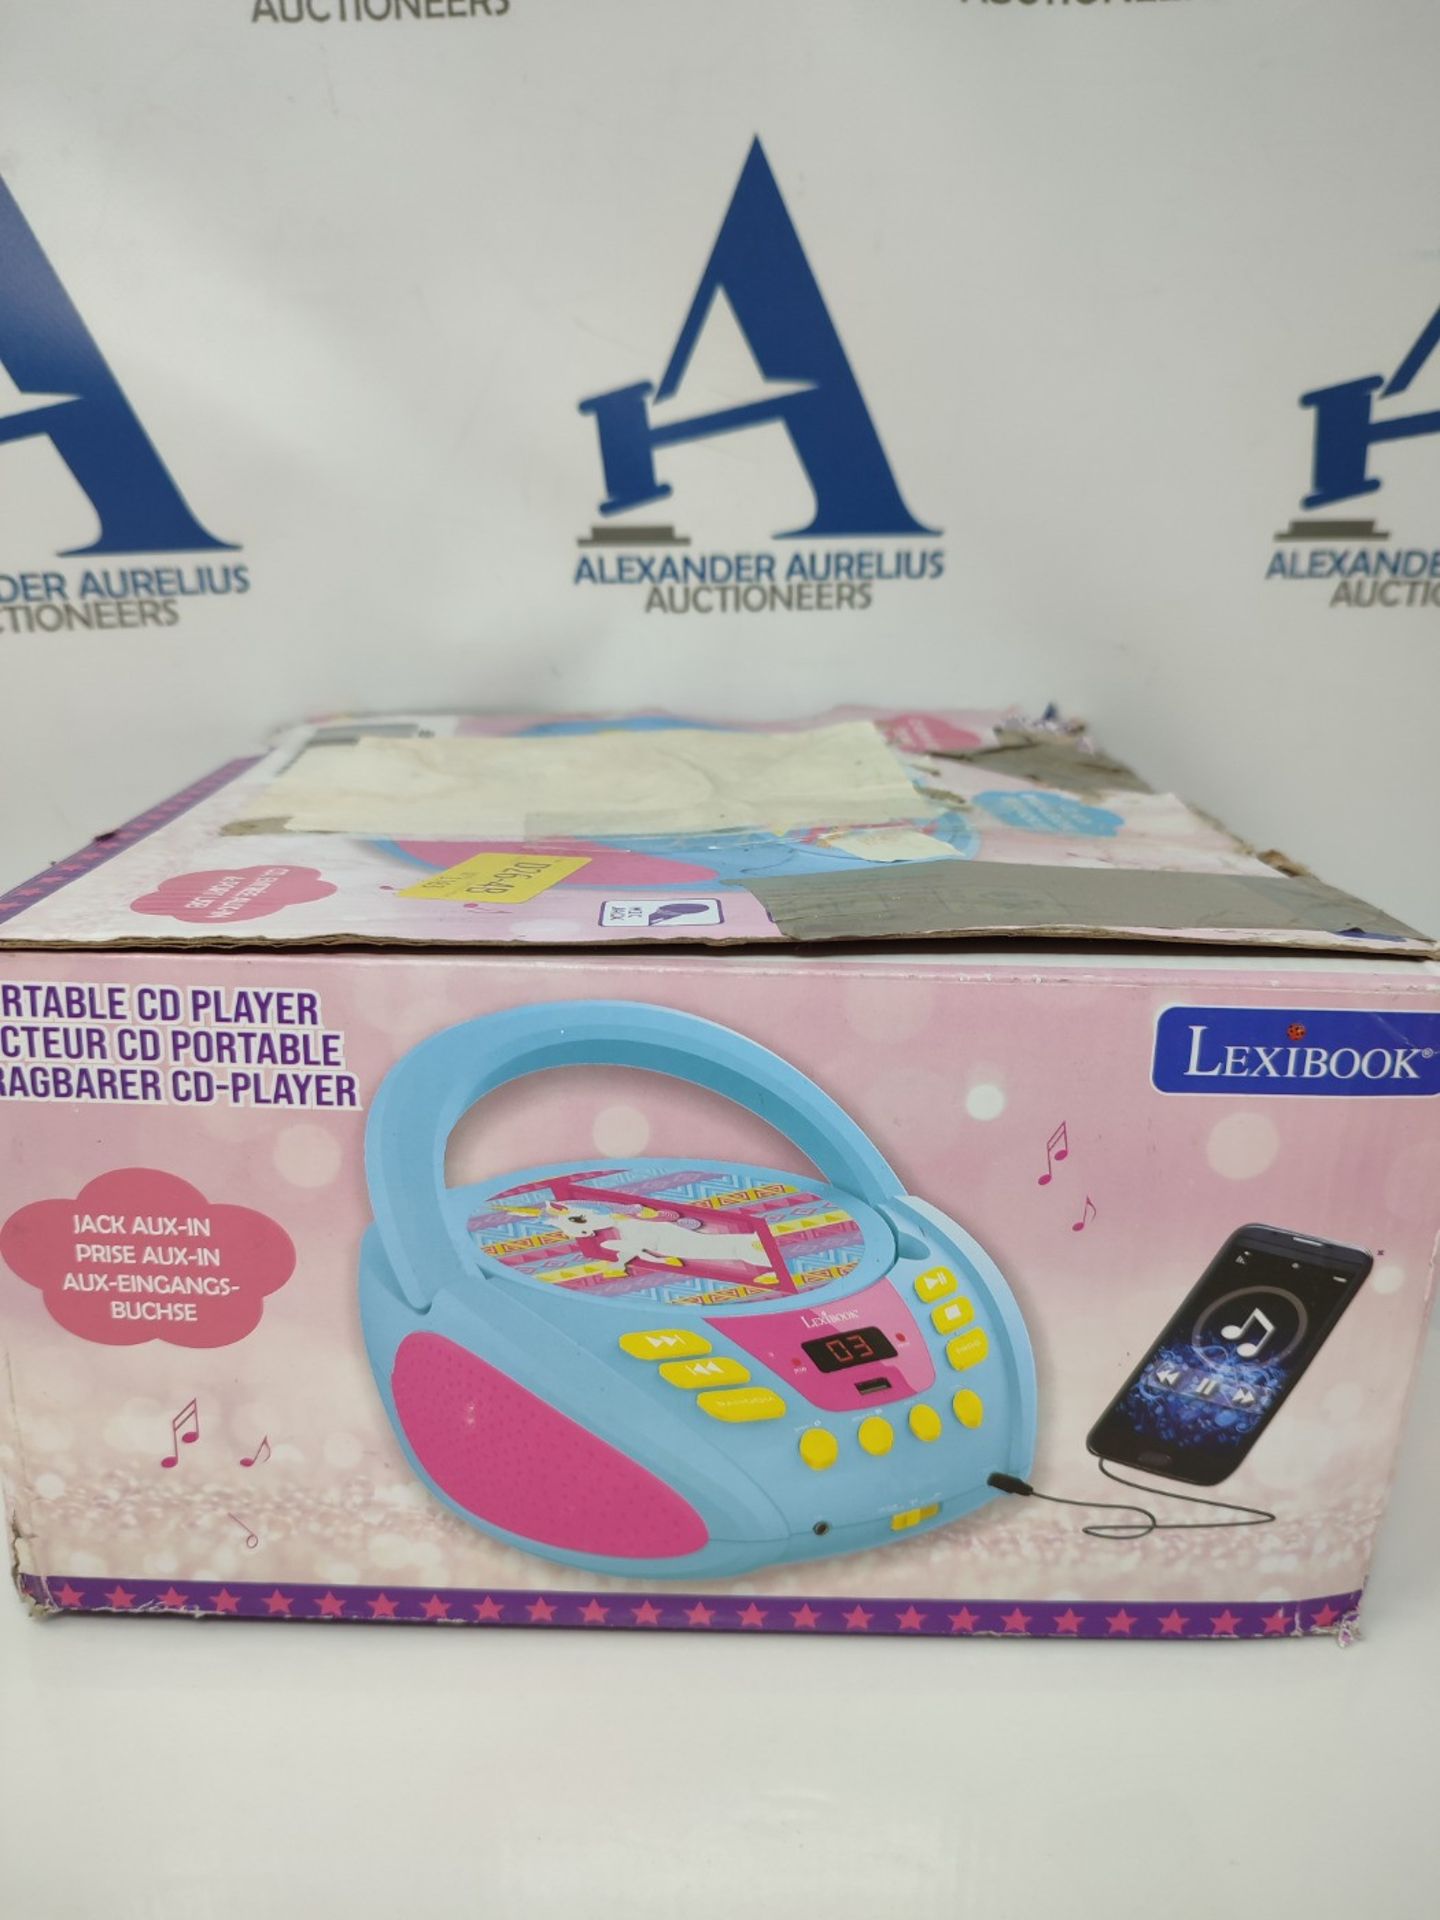 Lexibook CD Player Unicorn, AUX-in Jack, USB Port, AC or Battery-Operated, Blue/Pink, - Image 2 of 3